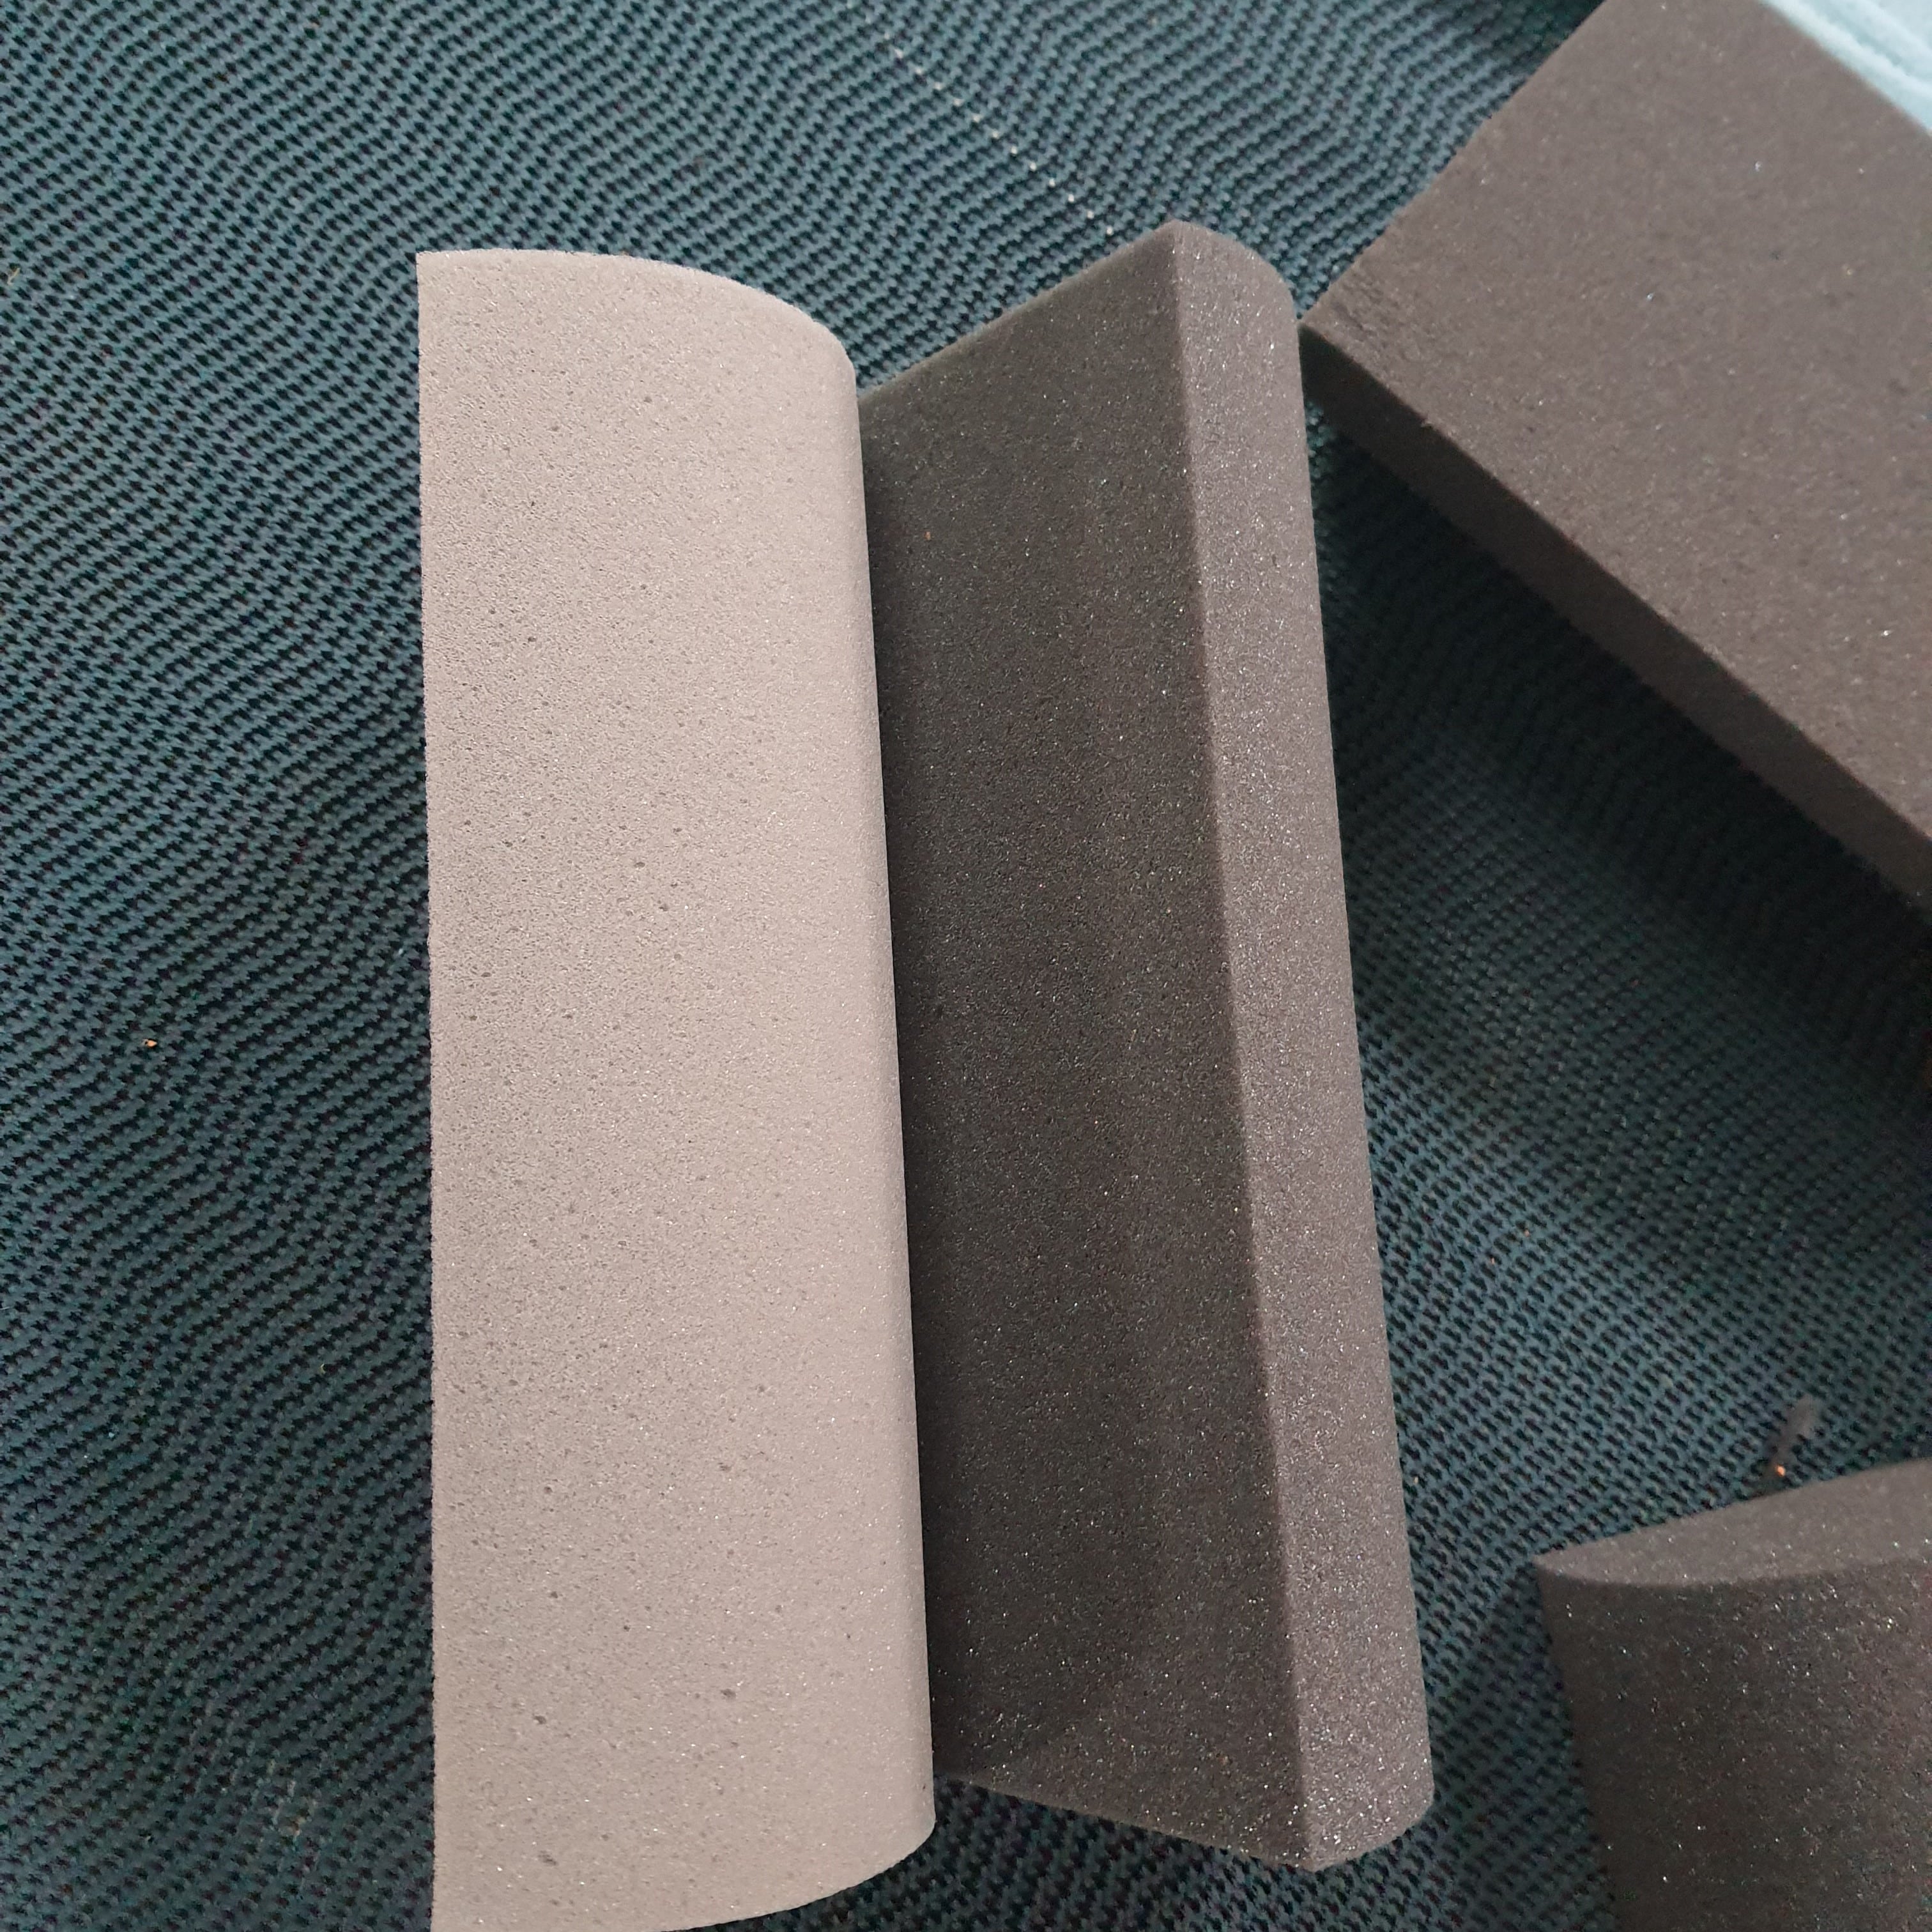  View larger image Add to Compare  Share Polyurethane Foam Good Quality Excellent Materials Home Goods PU Carton Made in Vietnam Manufacturer 4